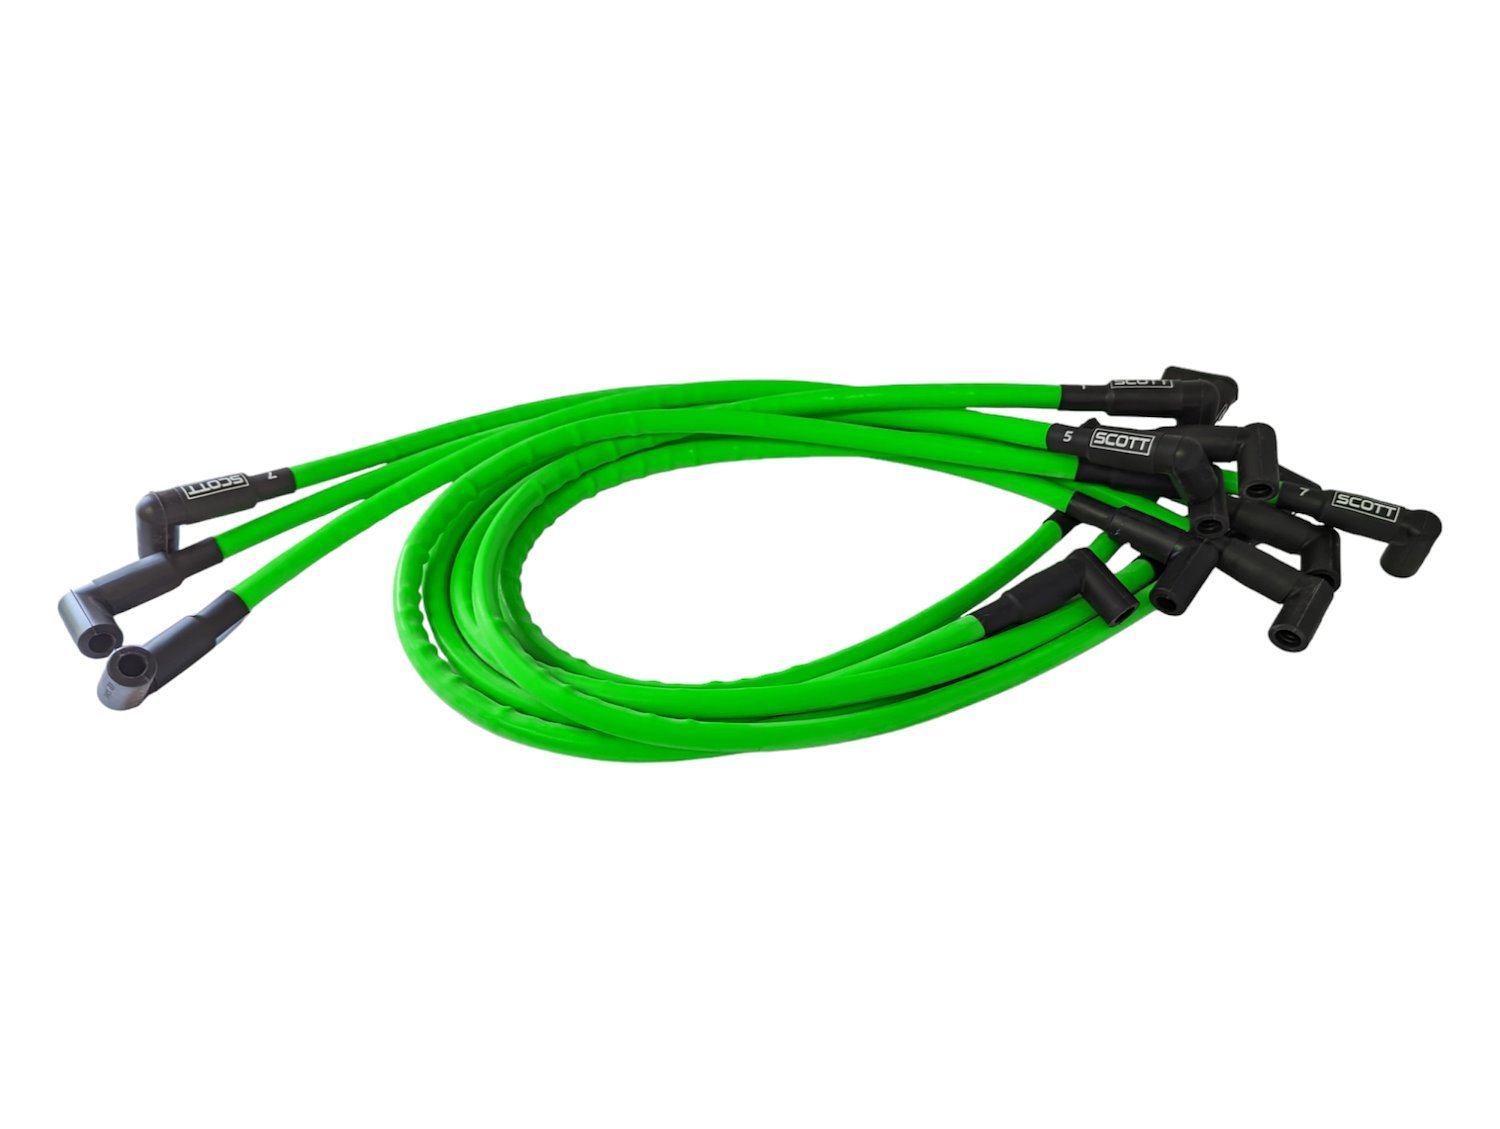 SPW300-CH-516-8 Super Mag Fiberglass-Oversleeved Spark Plug Wire Set for Big Block Chevy Dragster, Under Header [Green]